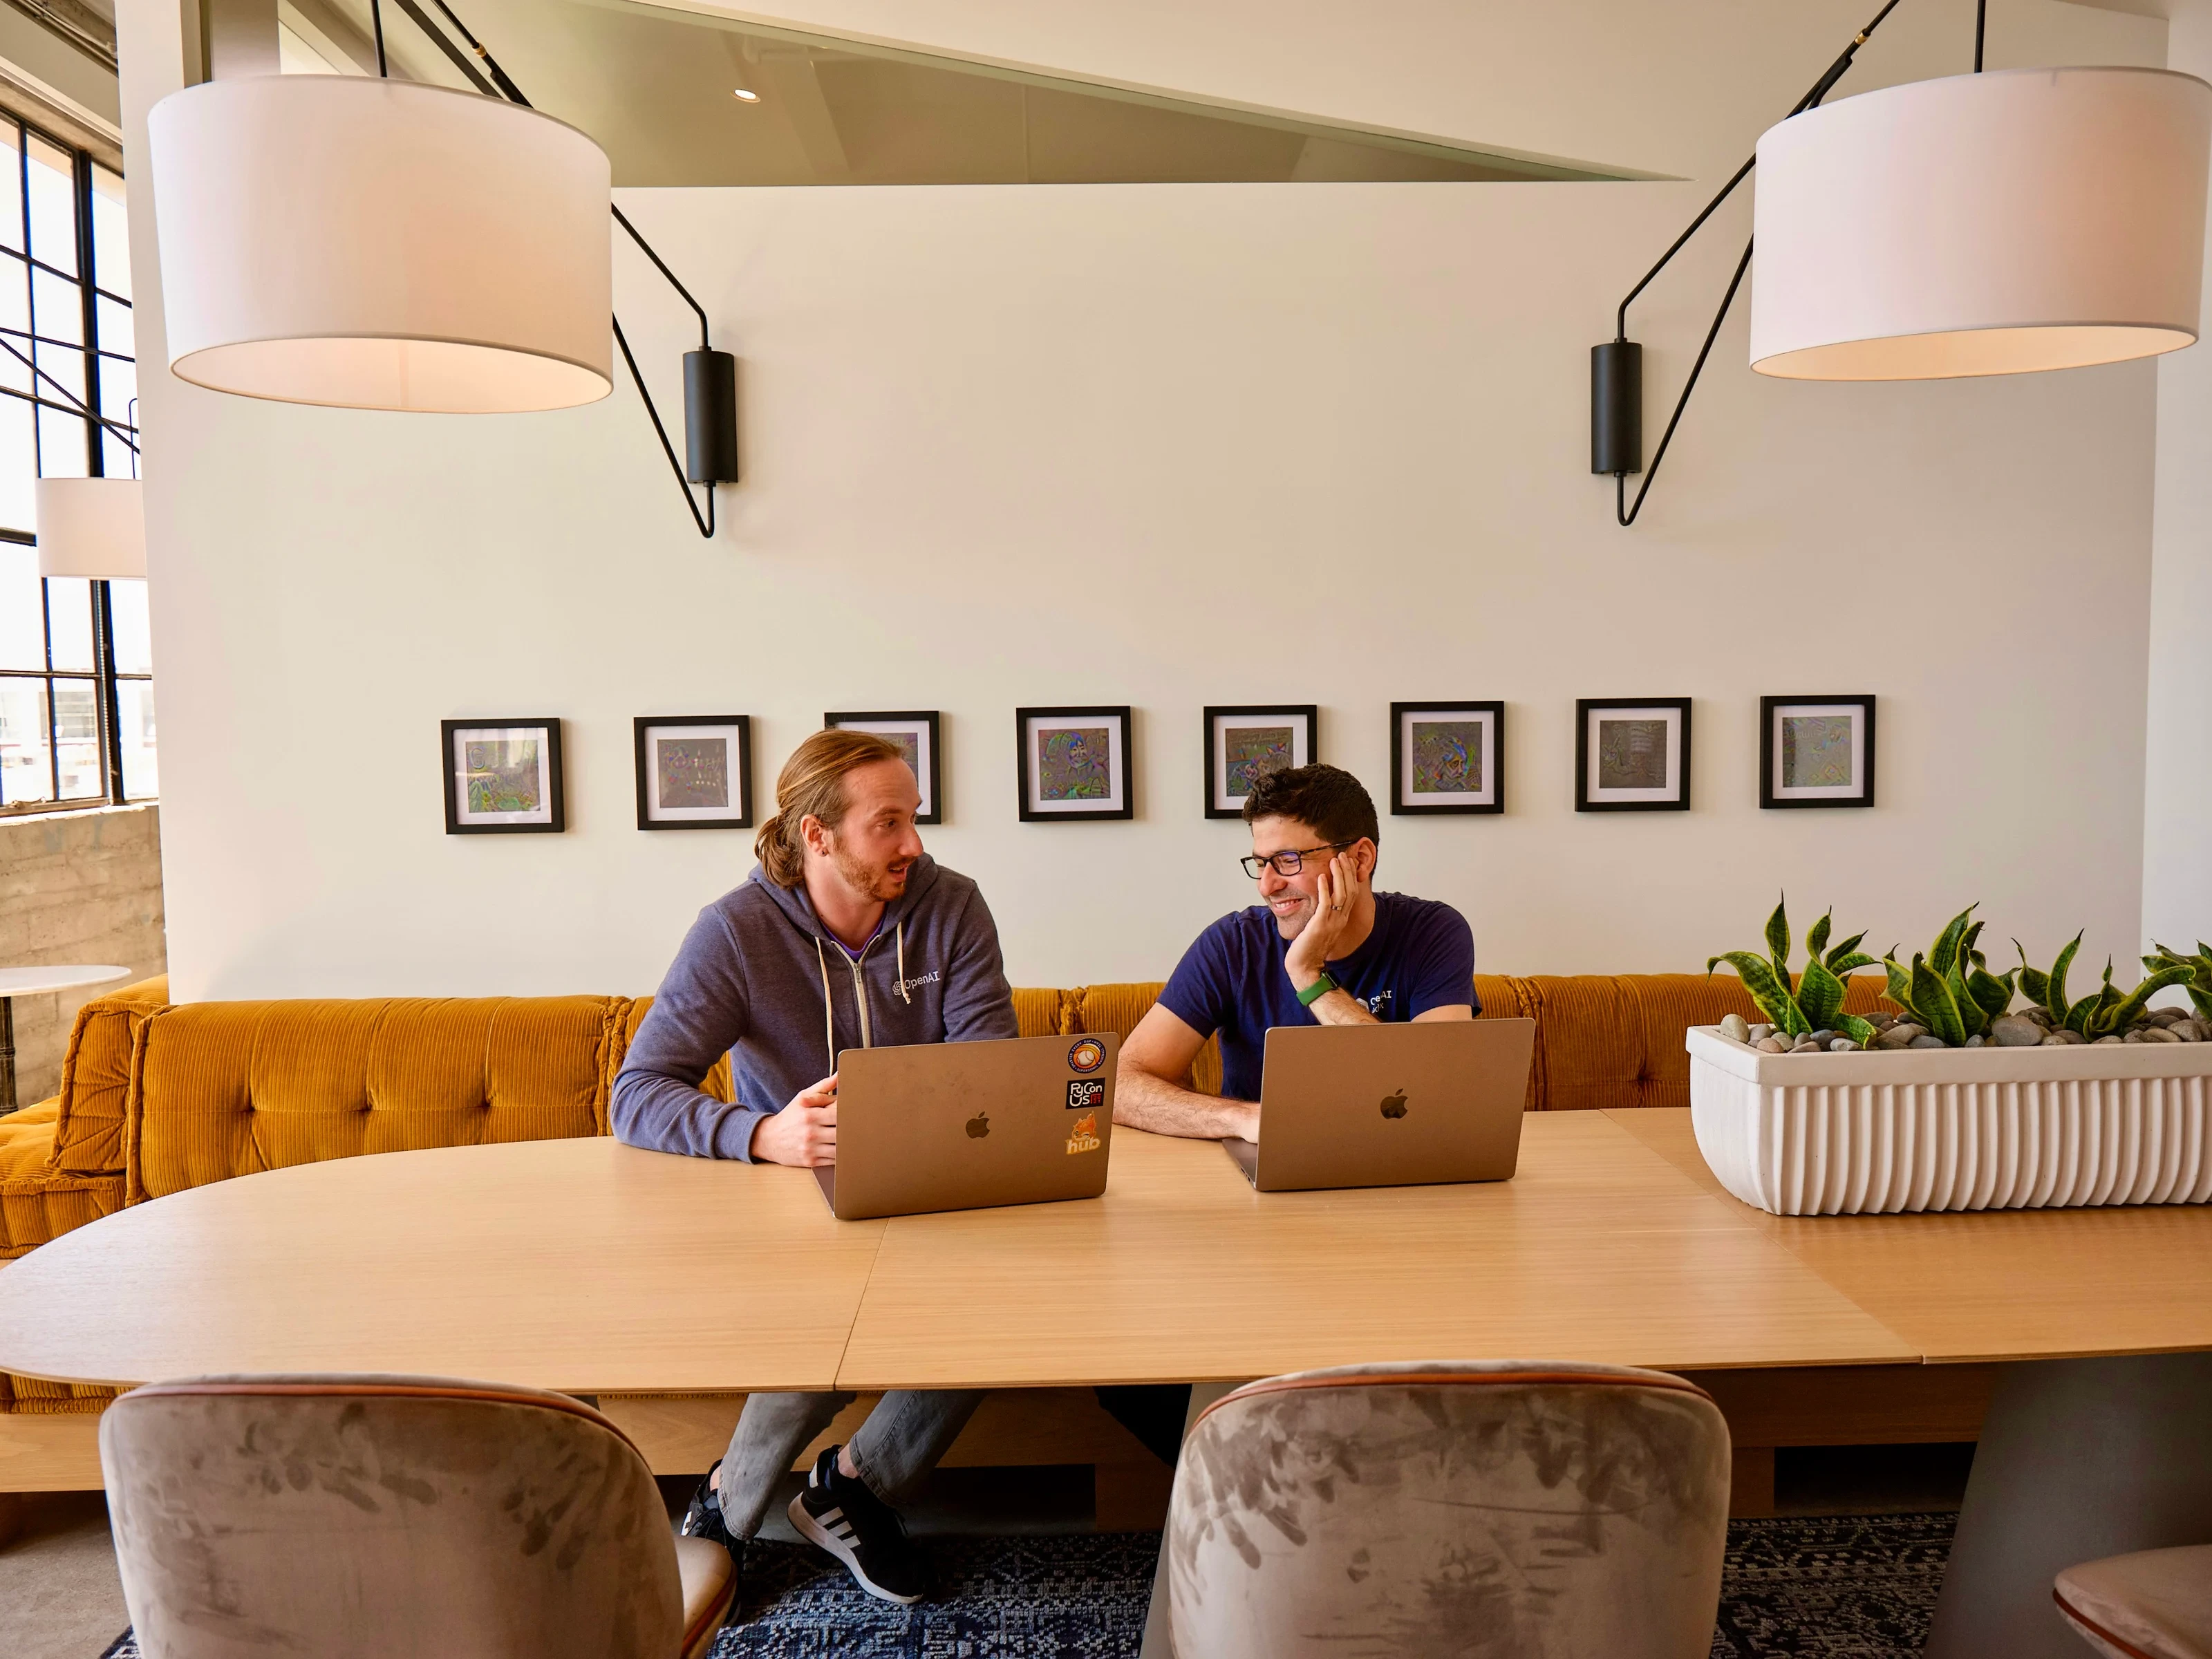  Two men smiling at each other, seated at a table with laptops in a well-lit, modern room with a mustard sofa, framed pictures on the wall, indoor plants, and pendant lights.